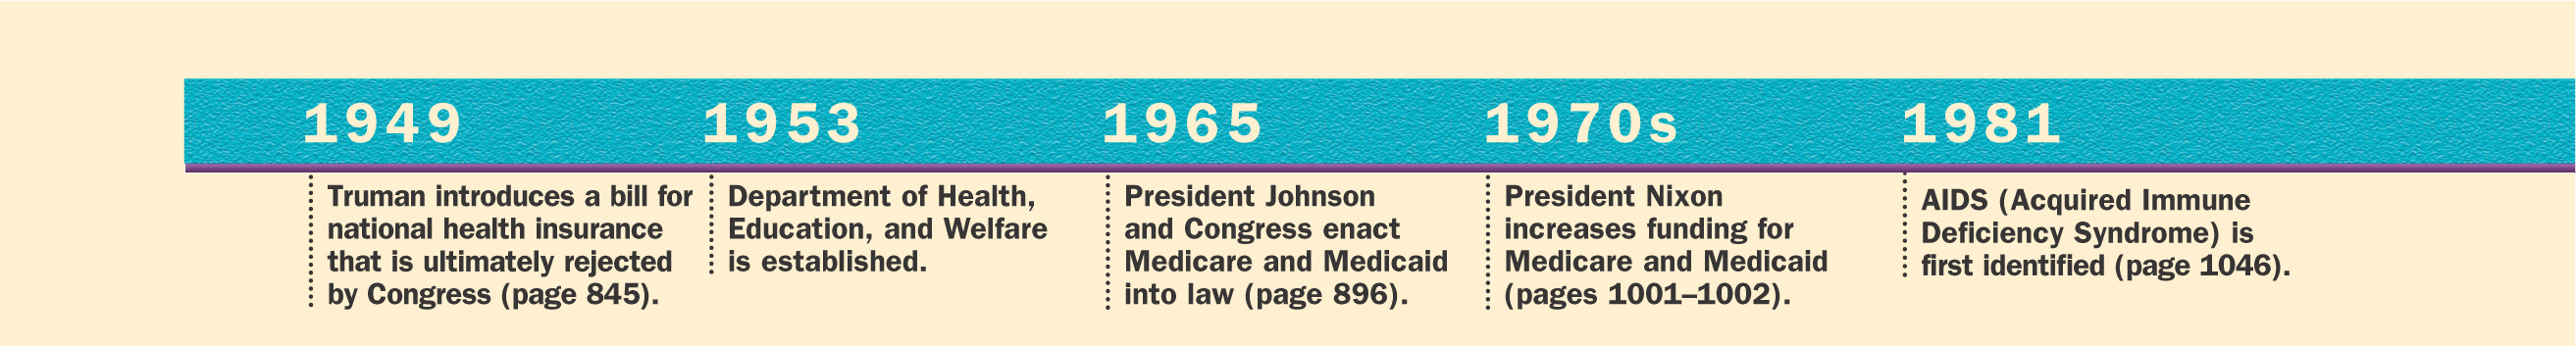 A timeline shows events in Health Care in the U.S. from 1949 to 2001.